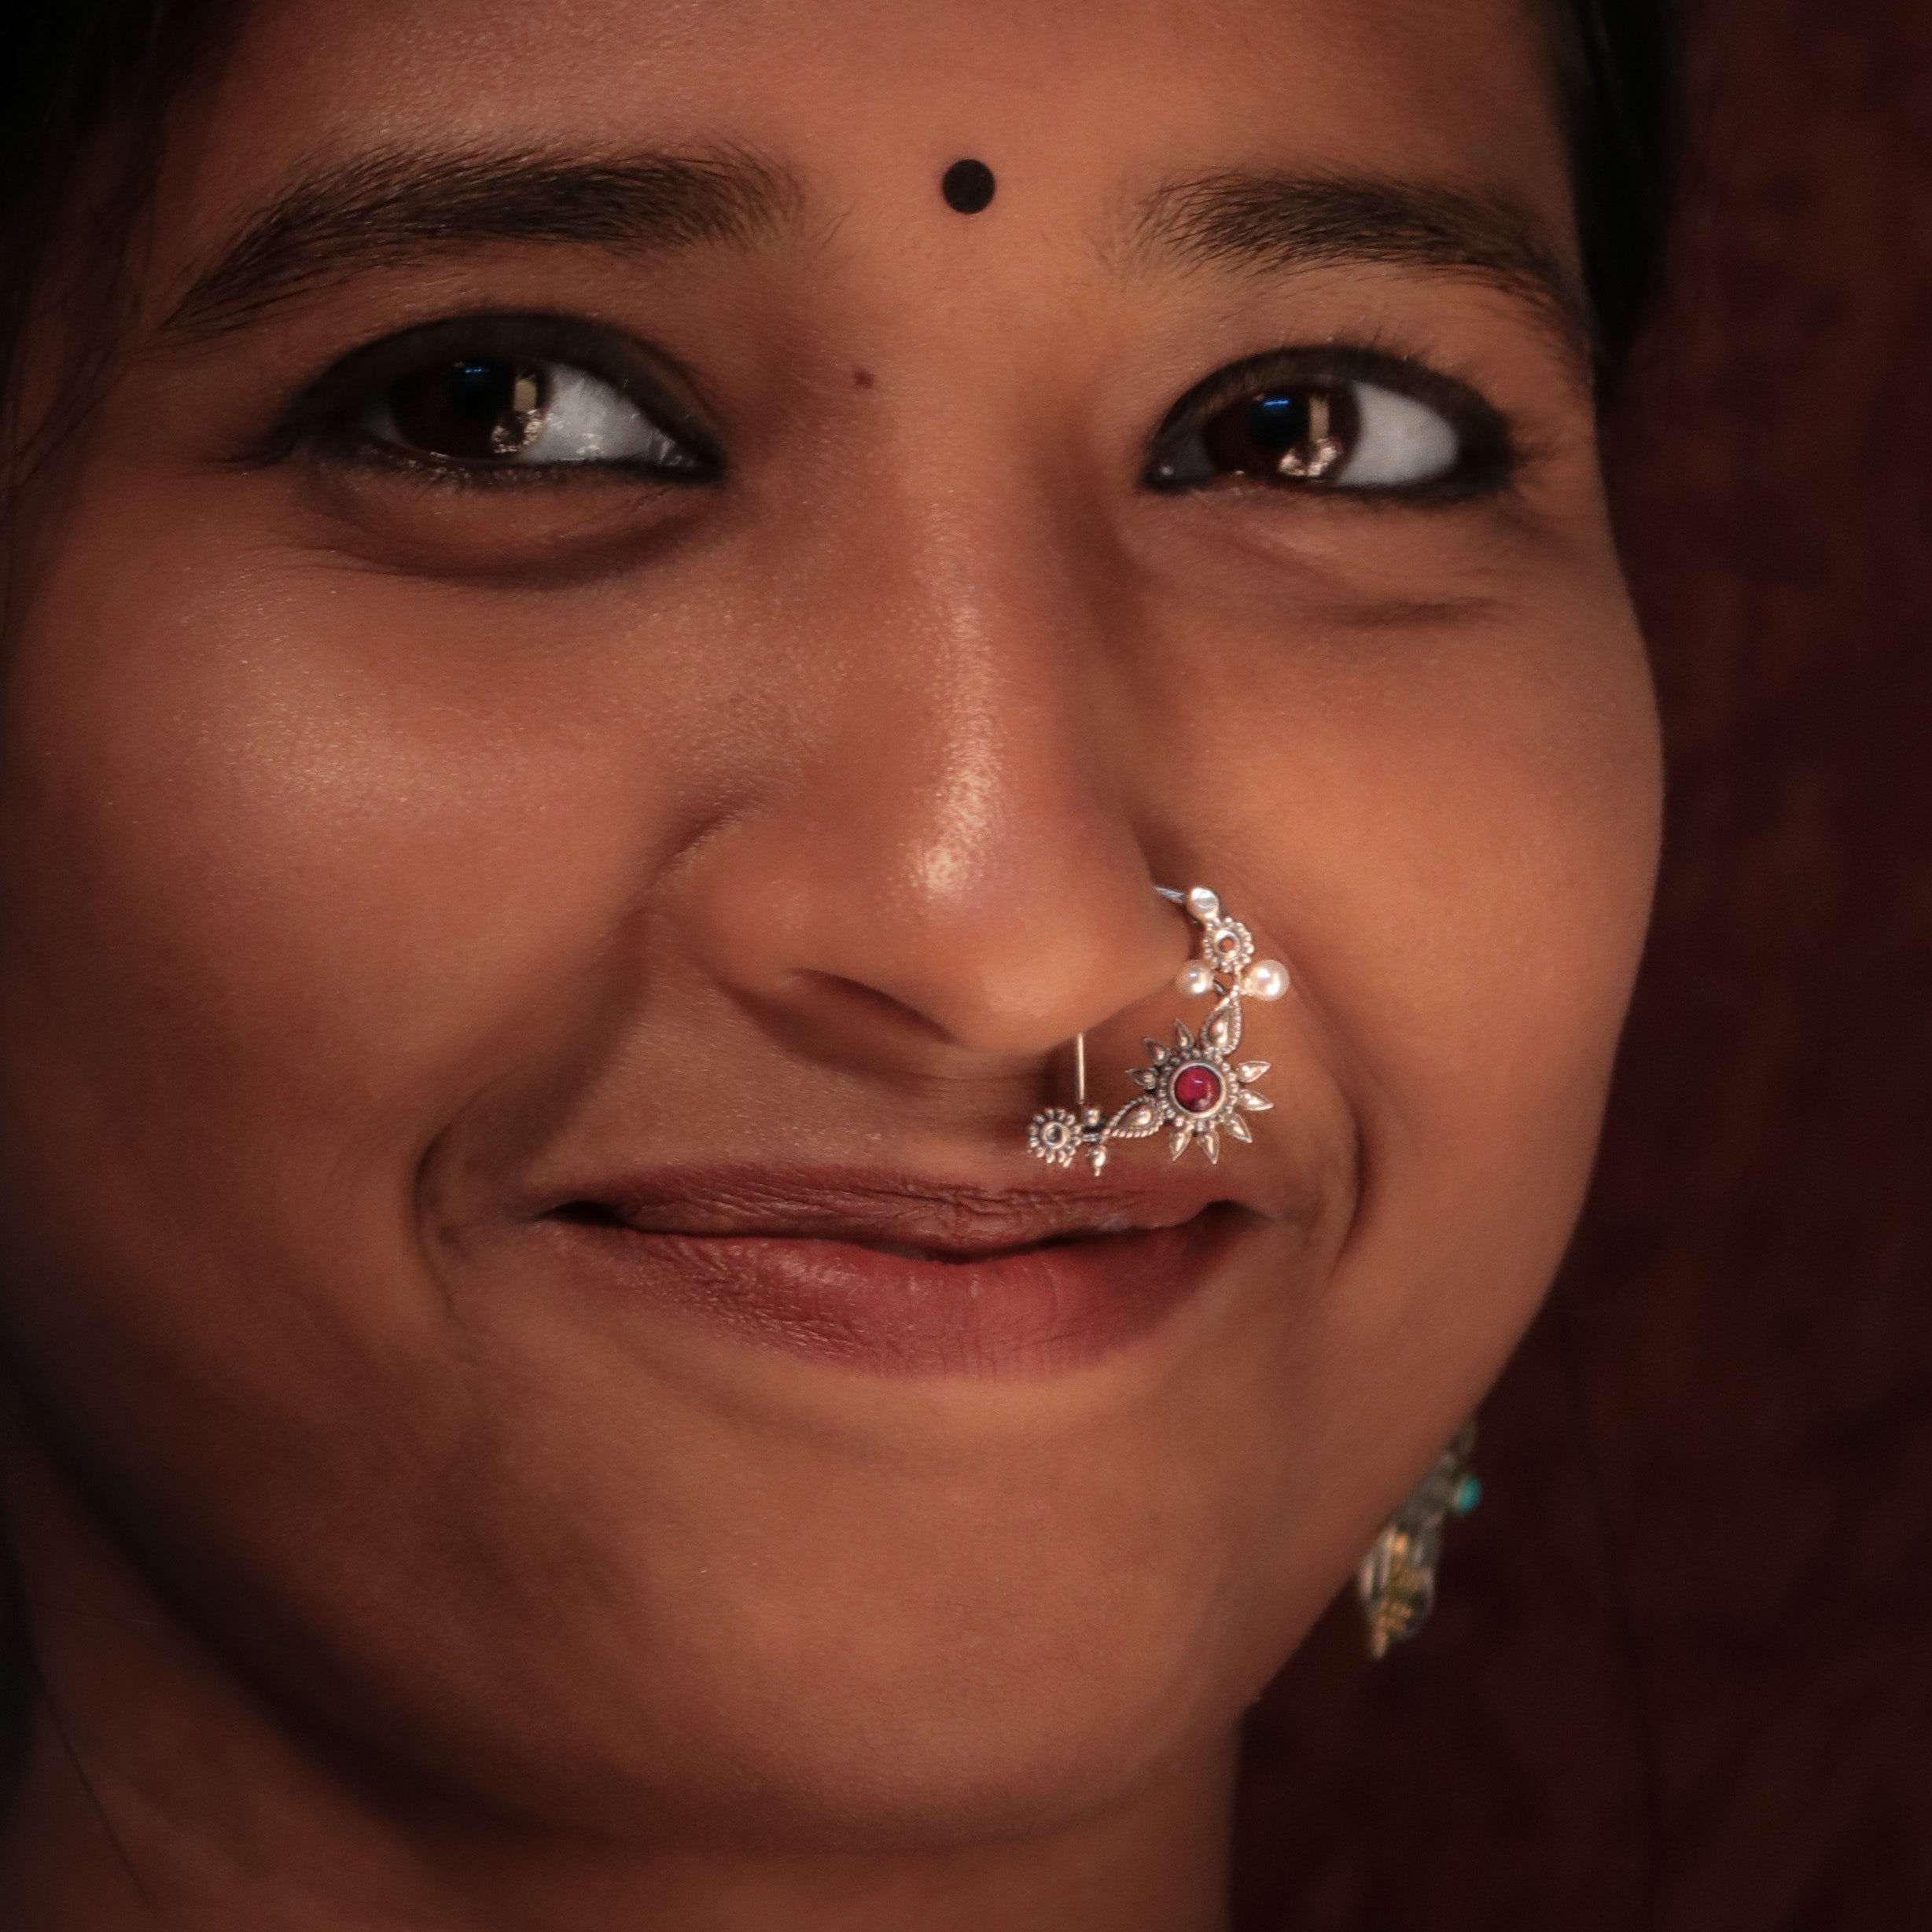 Gul Silver Nath/Nose Ring By Moha - Pierced Left